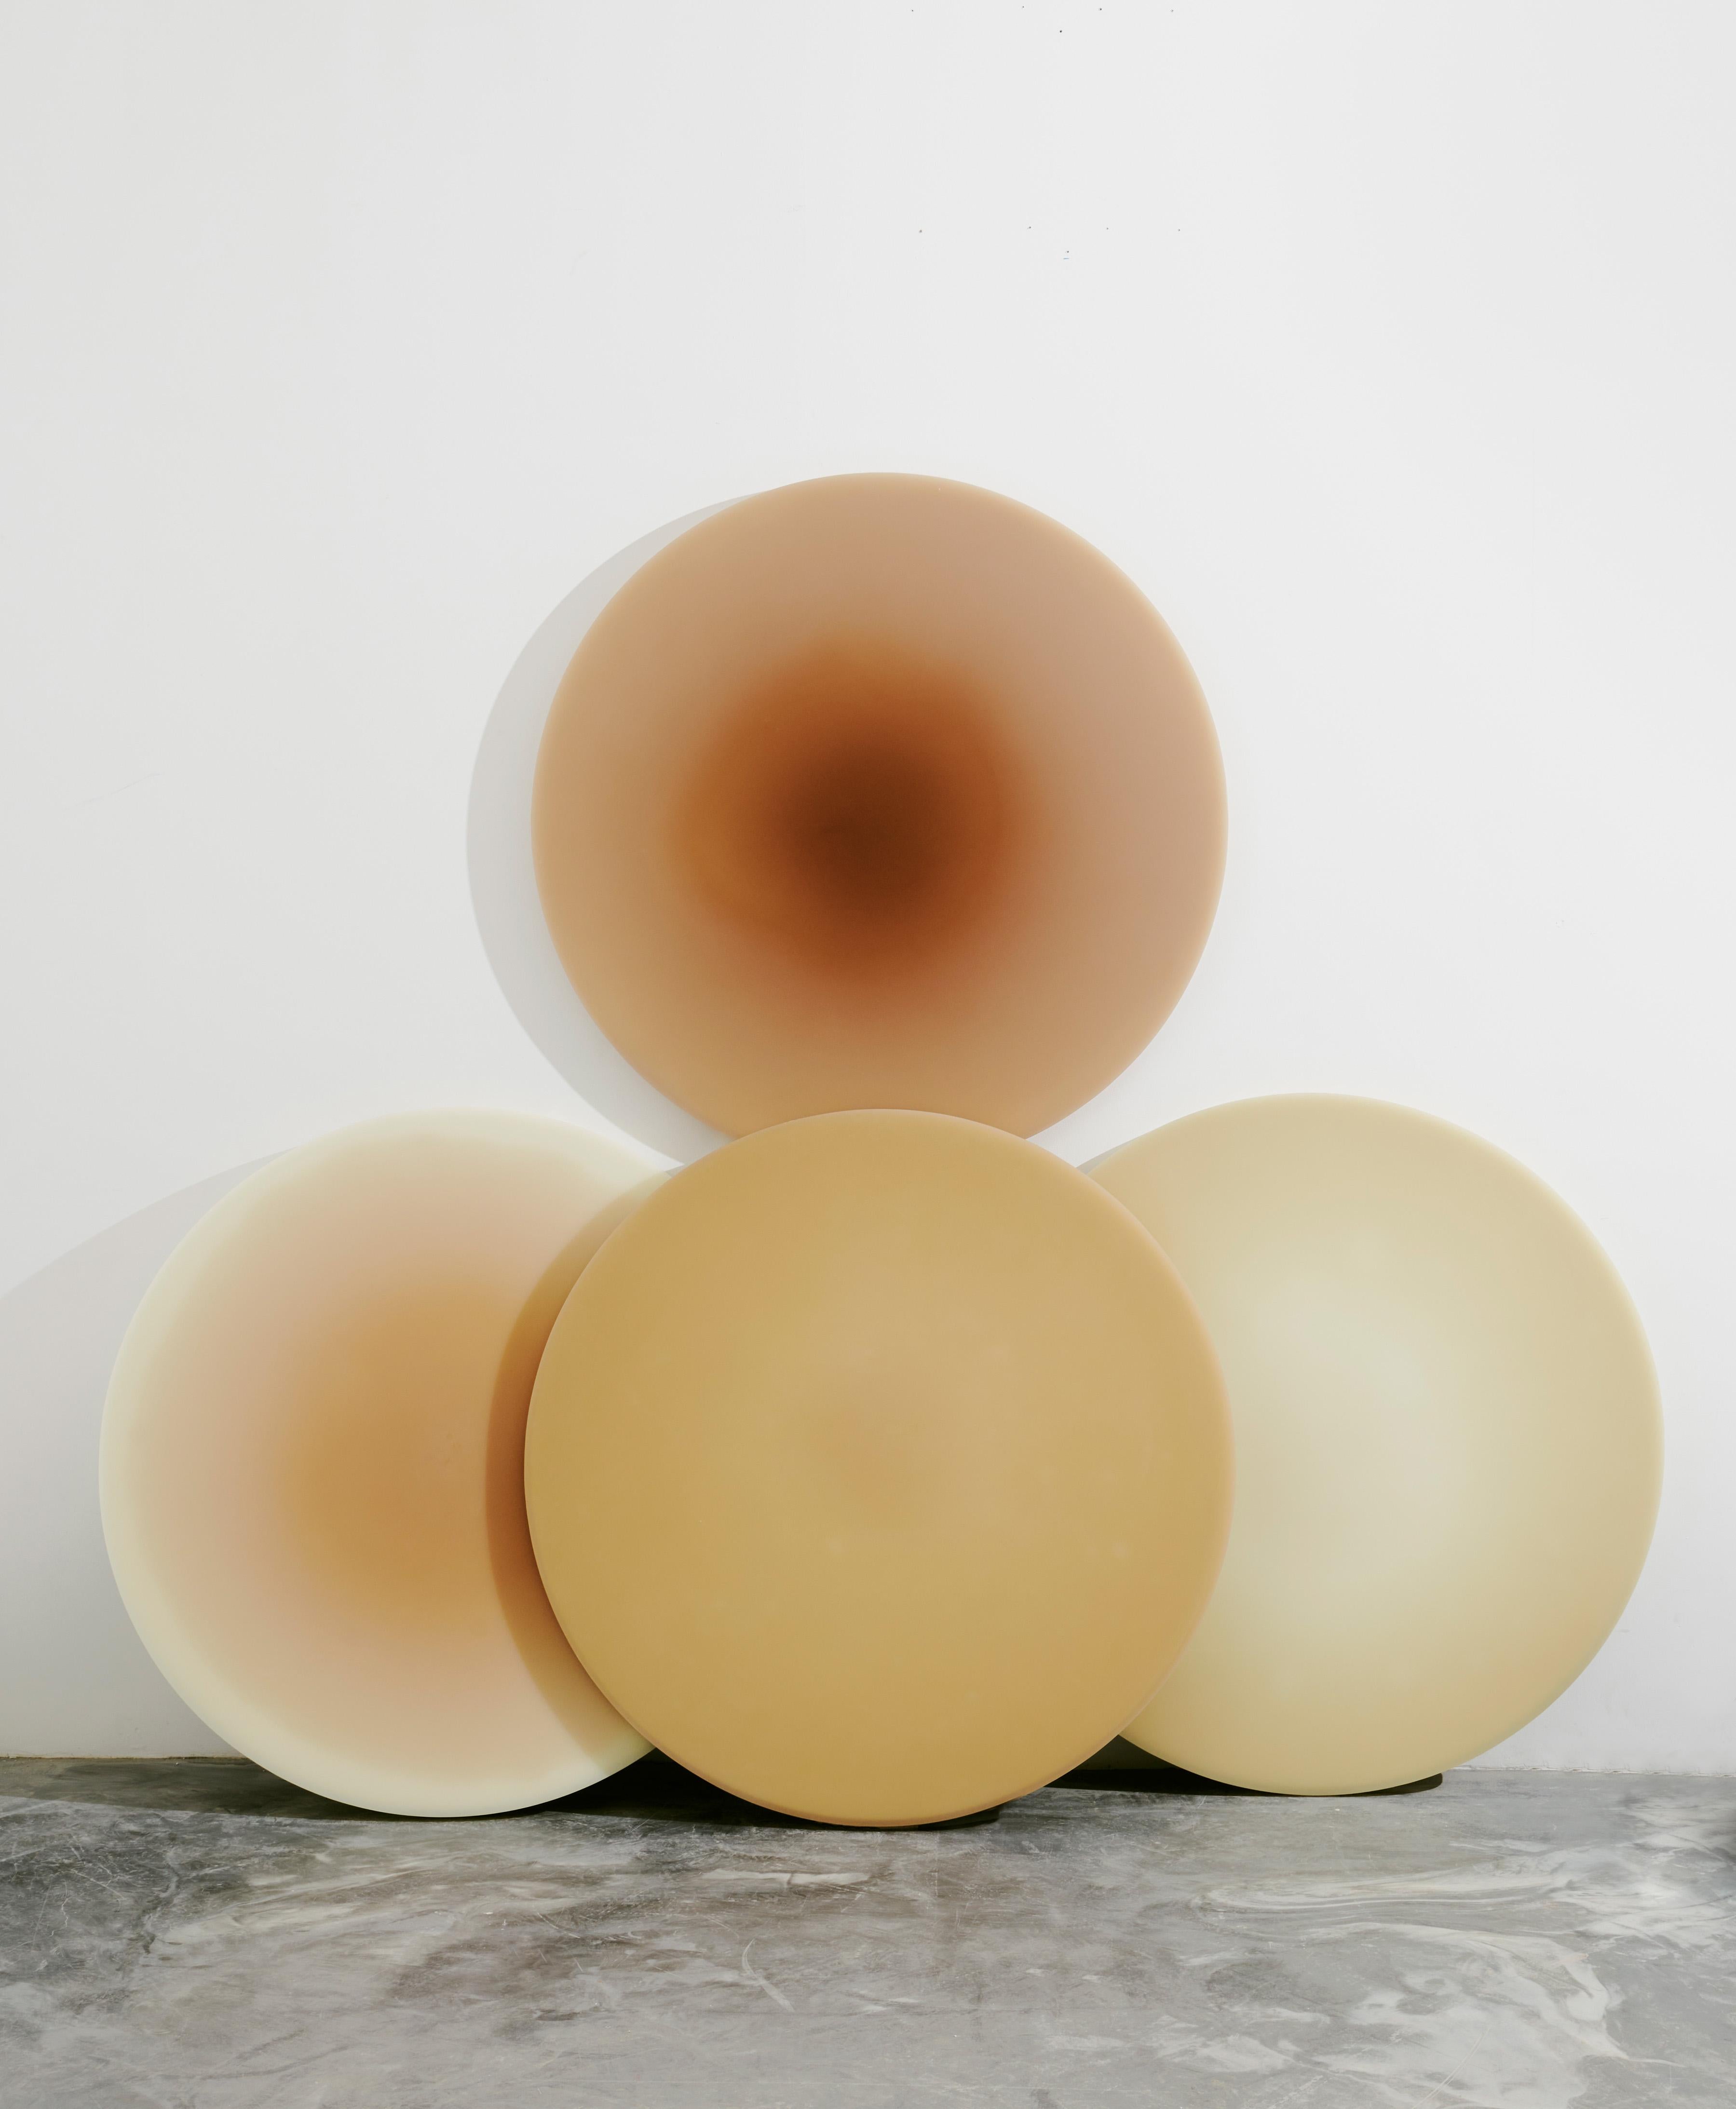 Tone Halo II by Facture
Resin, aluminum, wood
Measures: L 48 × W 48 × H 1.5 in
L121.92 × W121.92 × H 3.81cm


A large circular wall object features a soothing hue transitioning from a dark nude tone to a medium nude tone. The shifting saturation